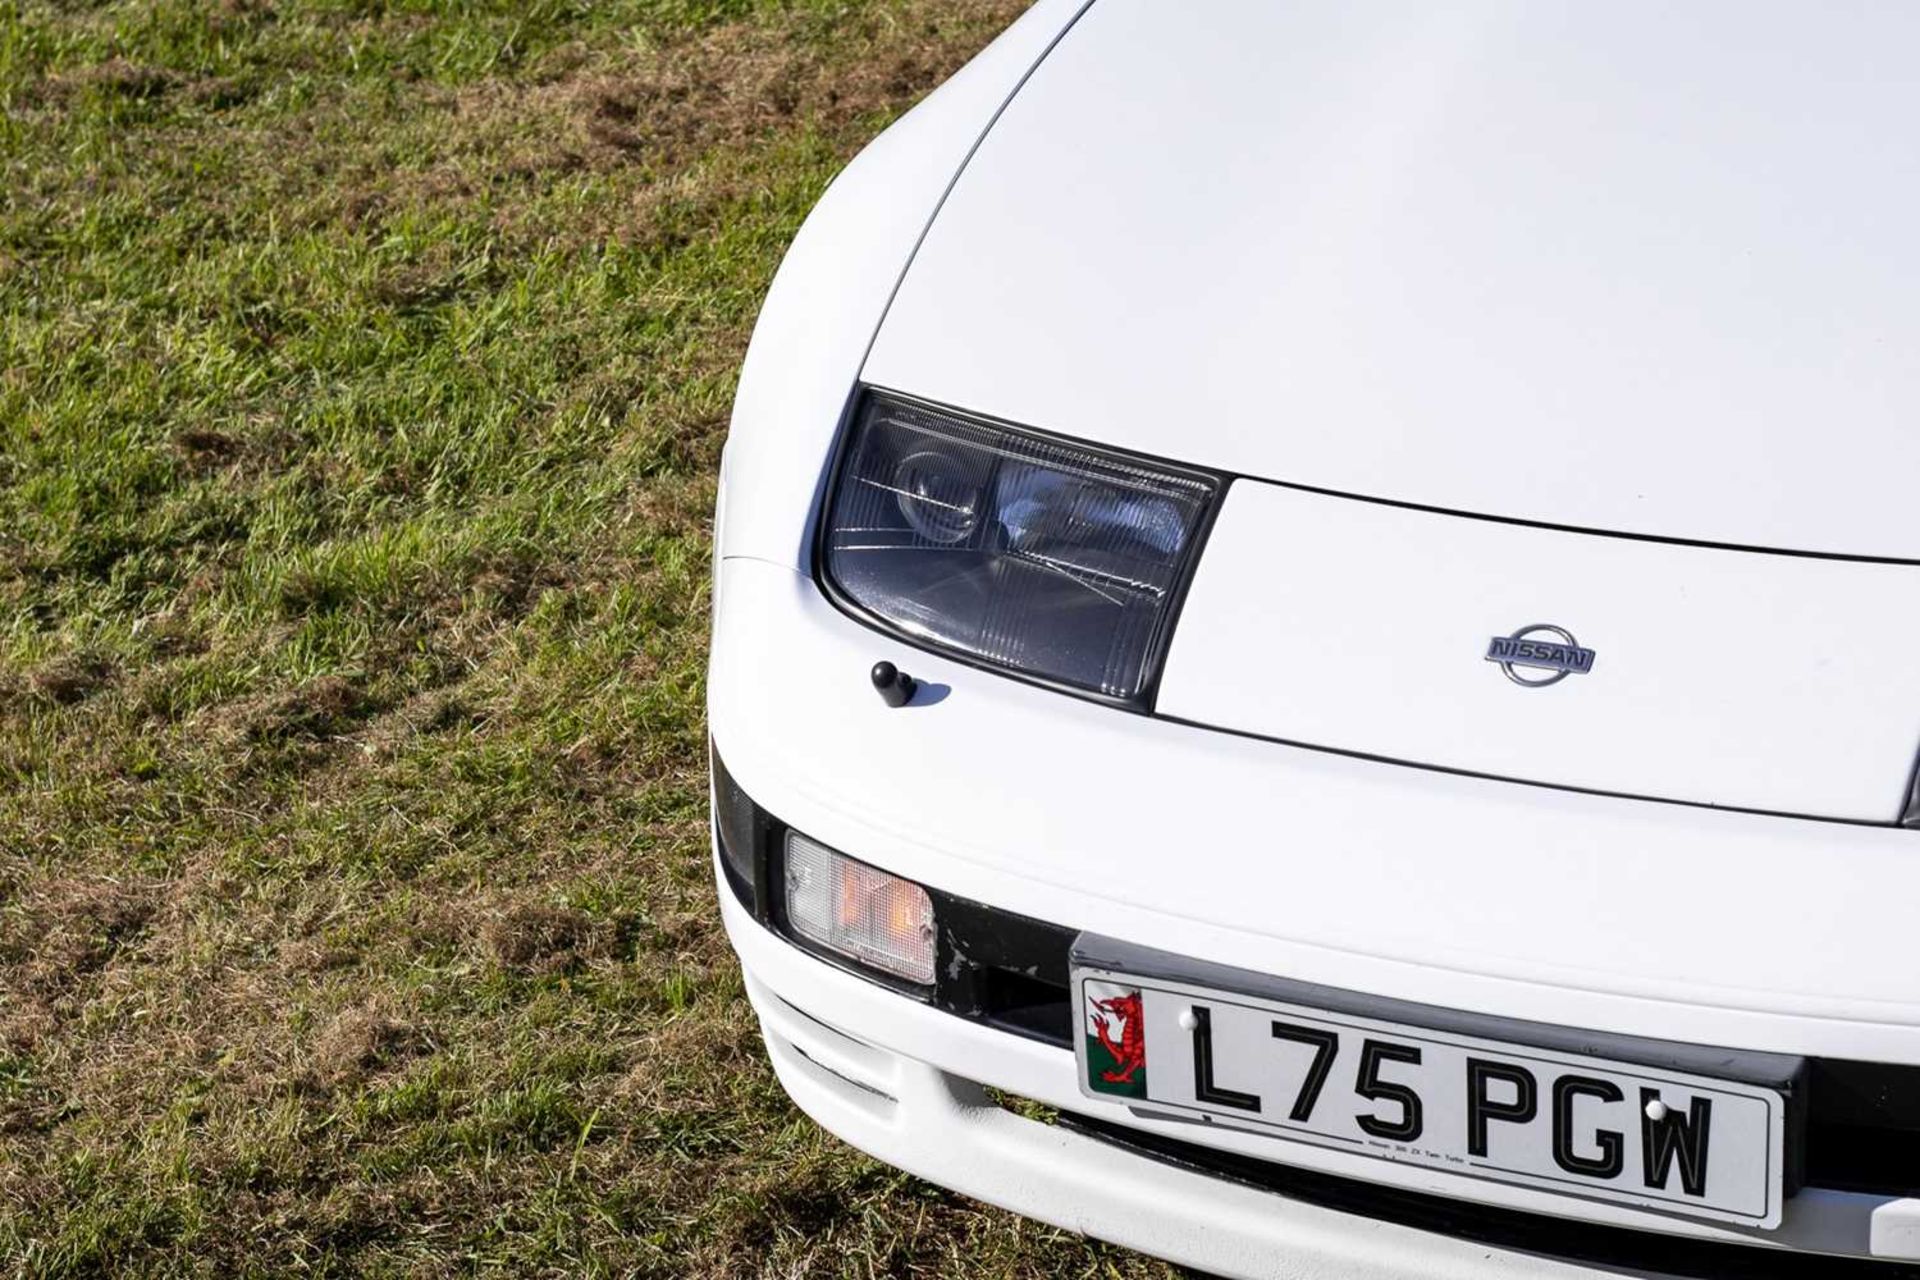 1990 Nissan 300ZX Turbo 2+2 Targa One of the last examples registered in the UK - Image 39 of 89